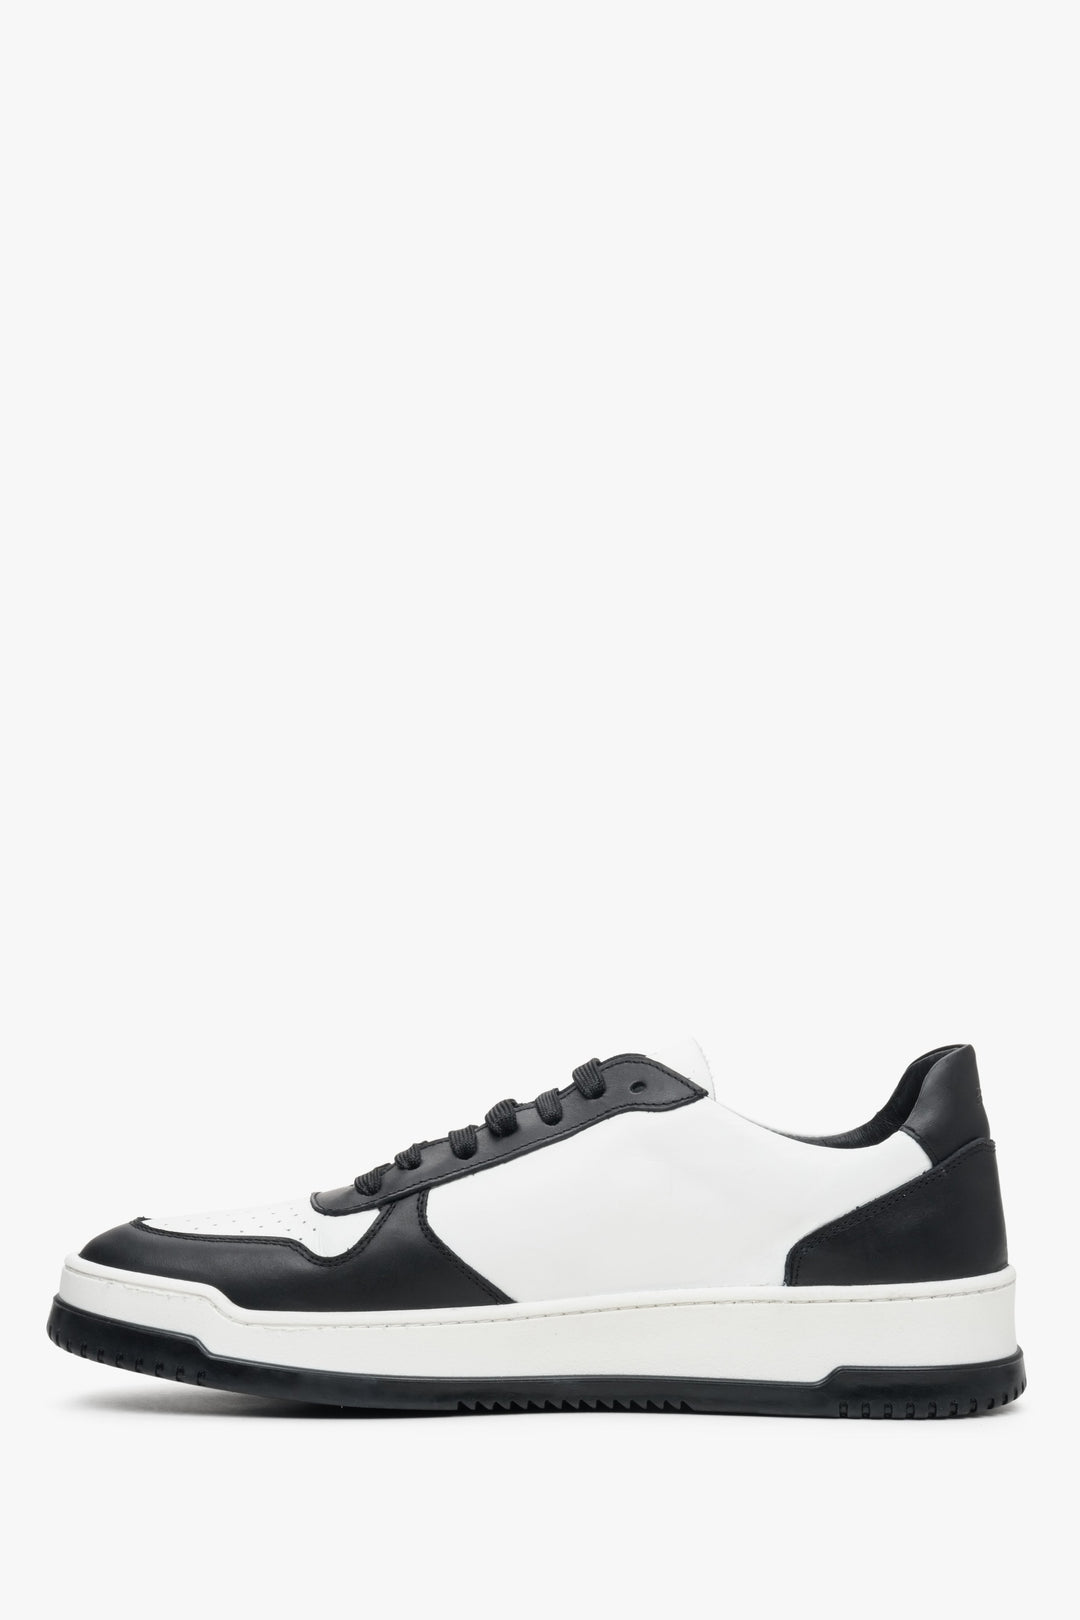 Men's black and white natural leather Estro sneakers - spring shoe profile.